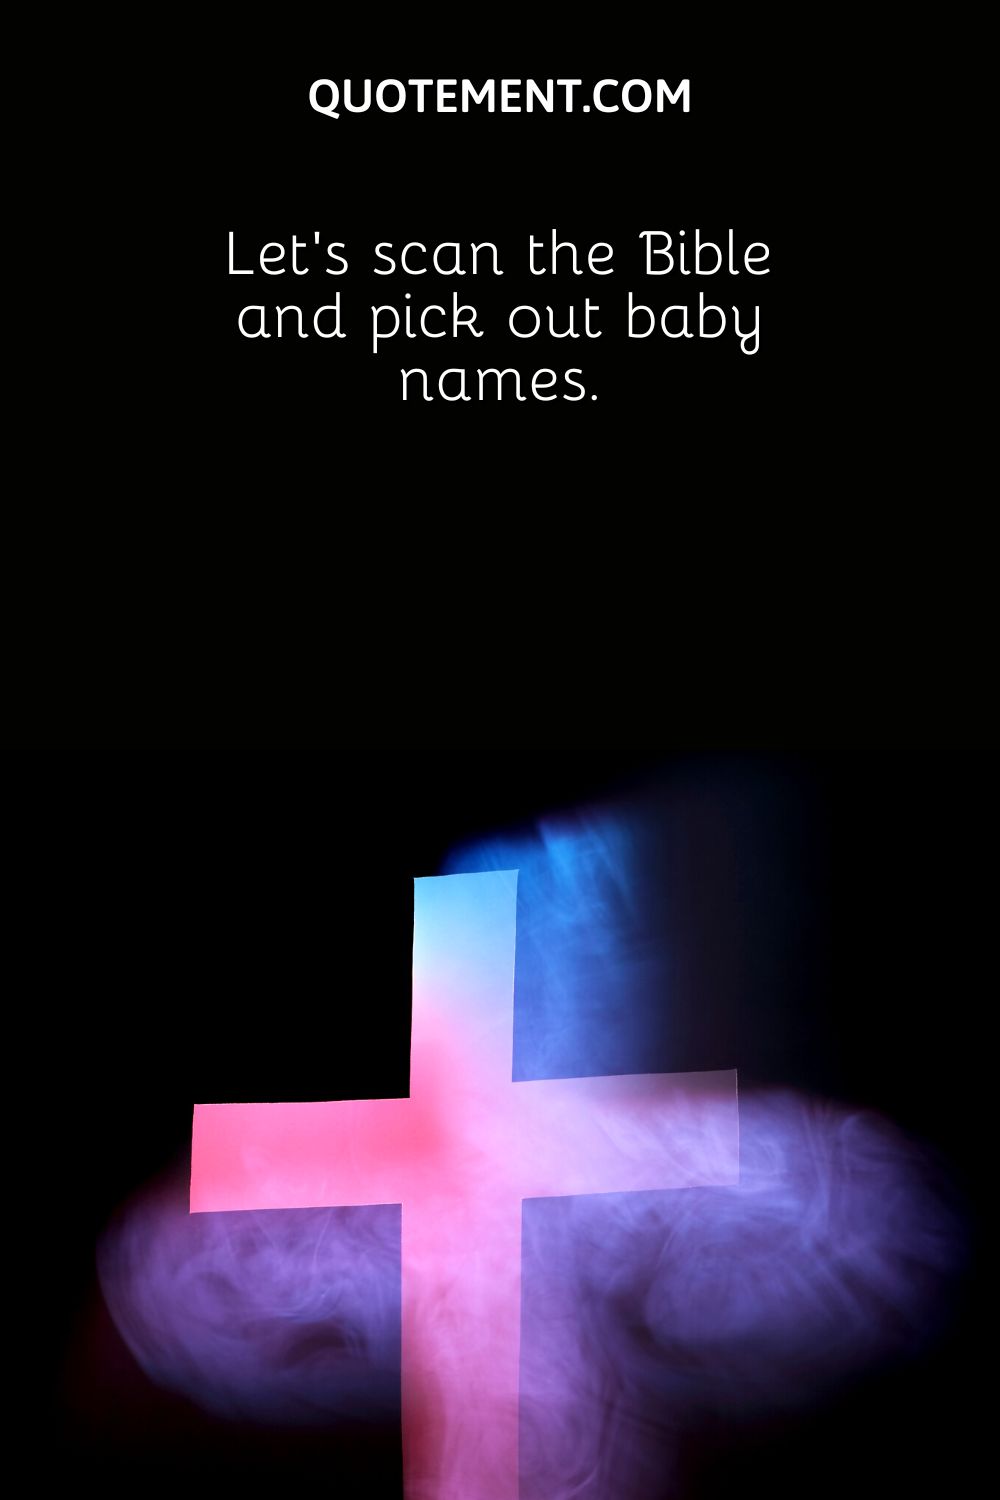 Let's scan the Bible and pick out baby names.